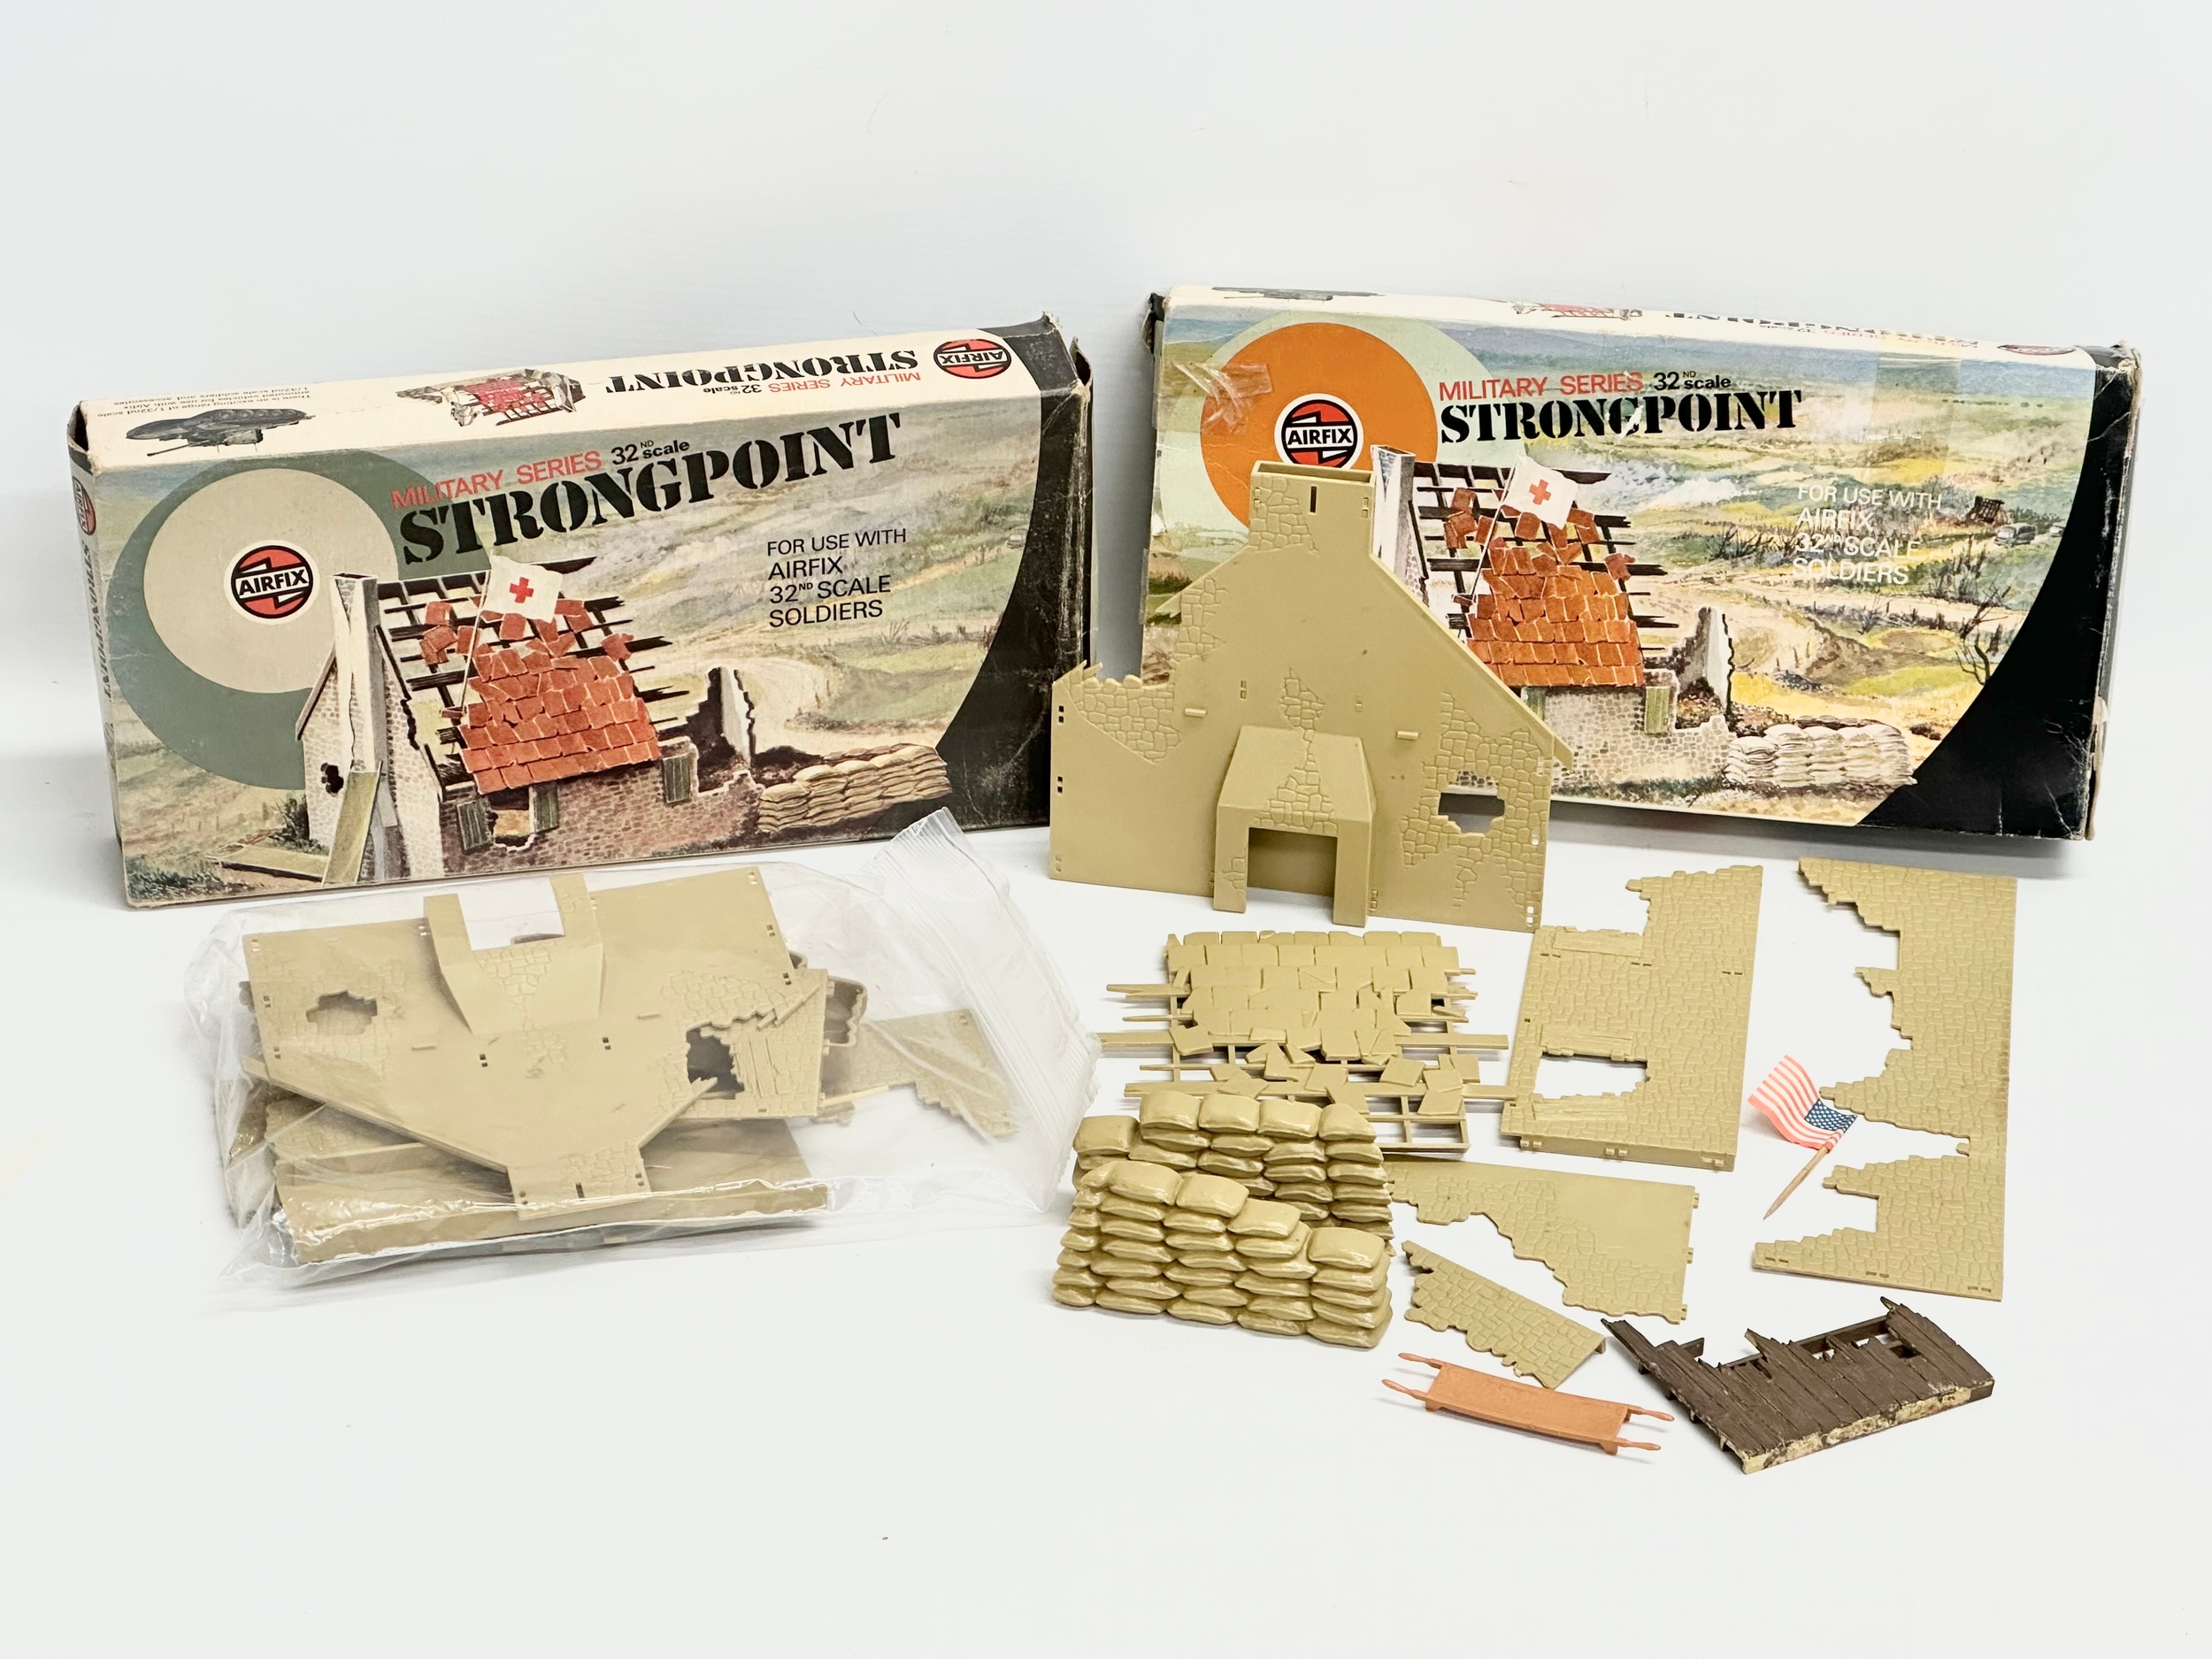 2 boxes of vintage Airfix Military Series Strongpoint model kits.